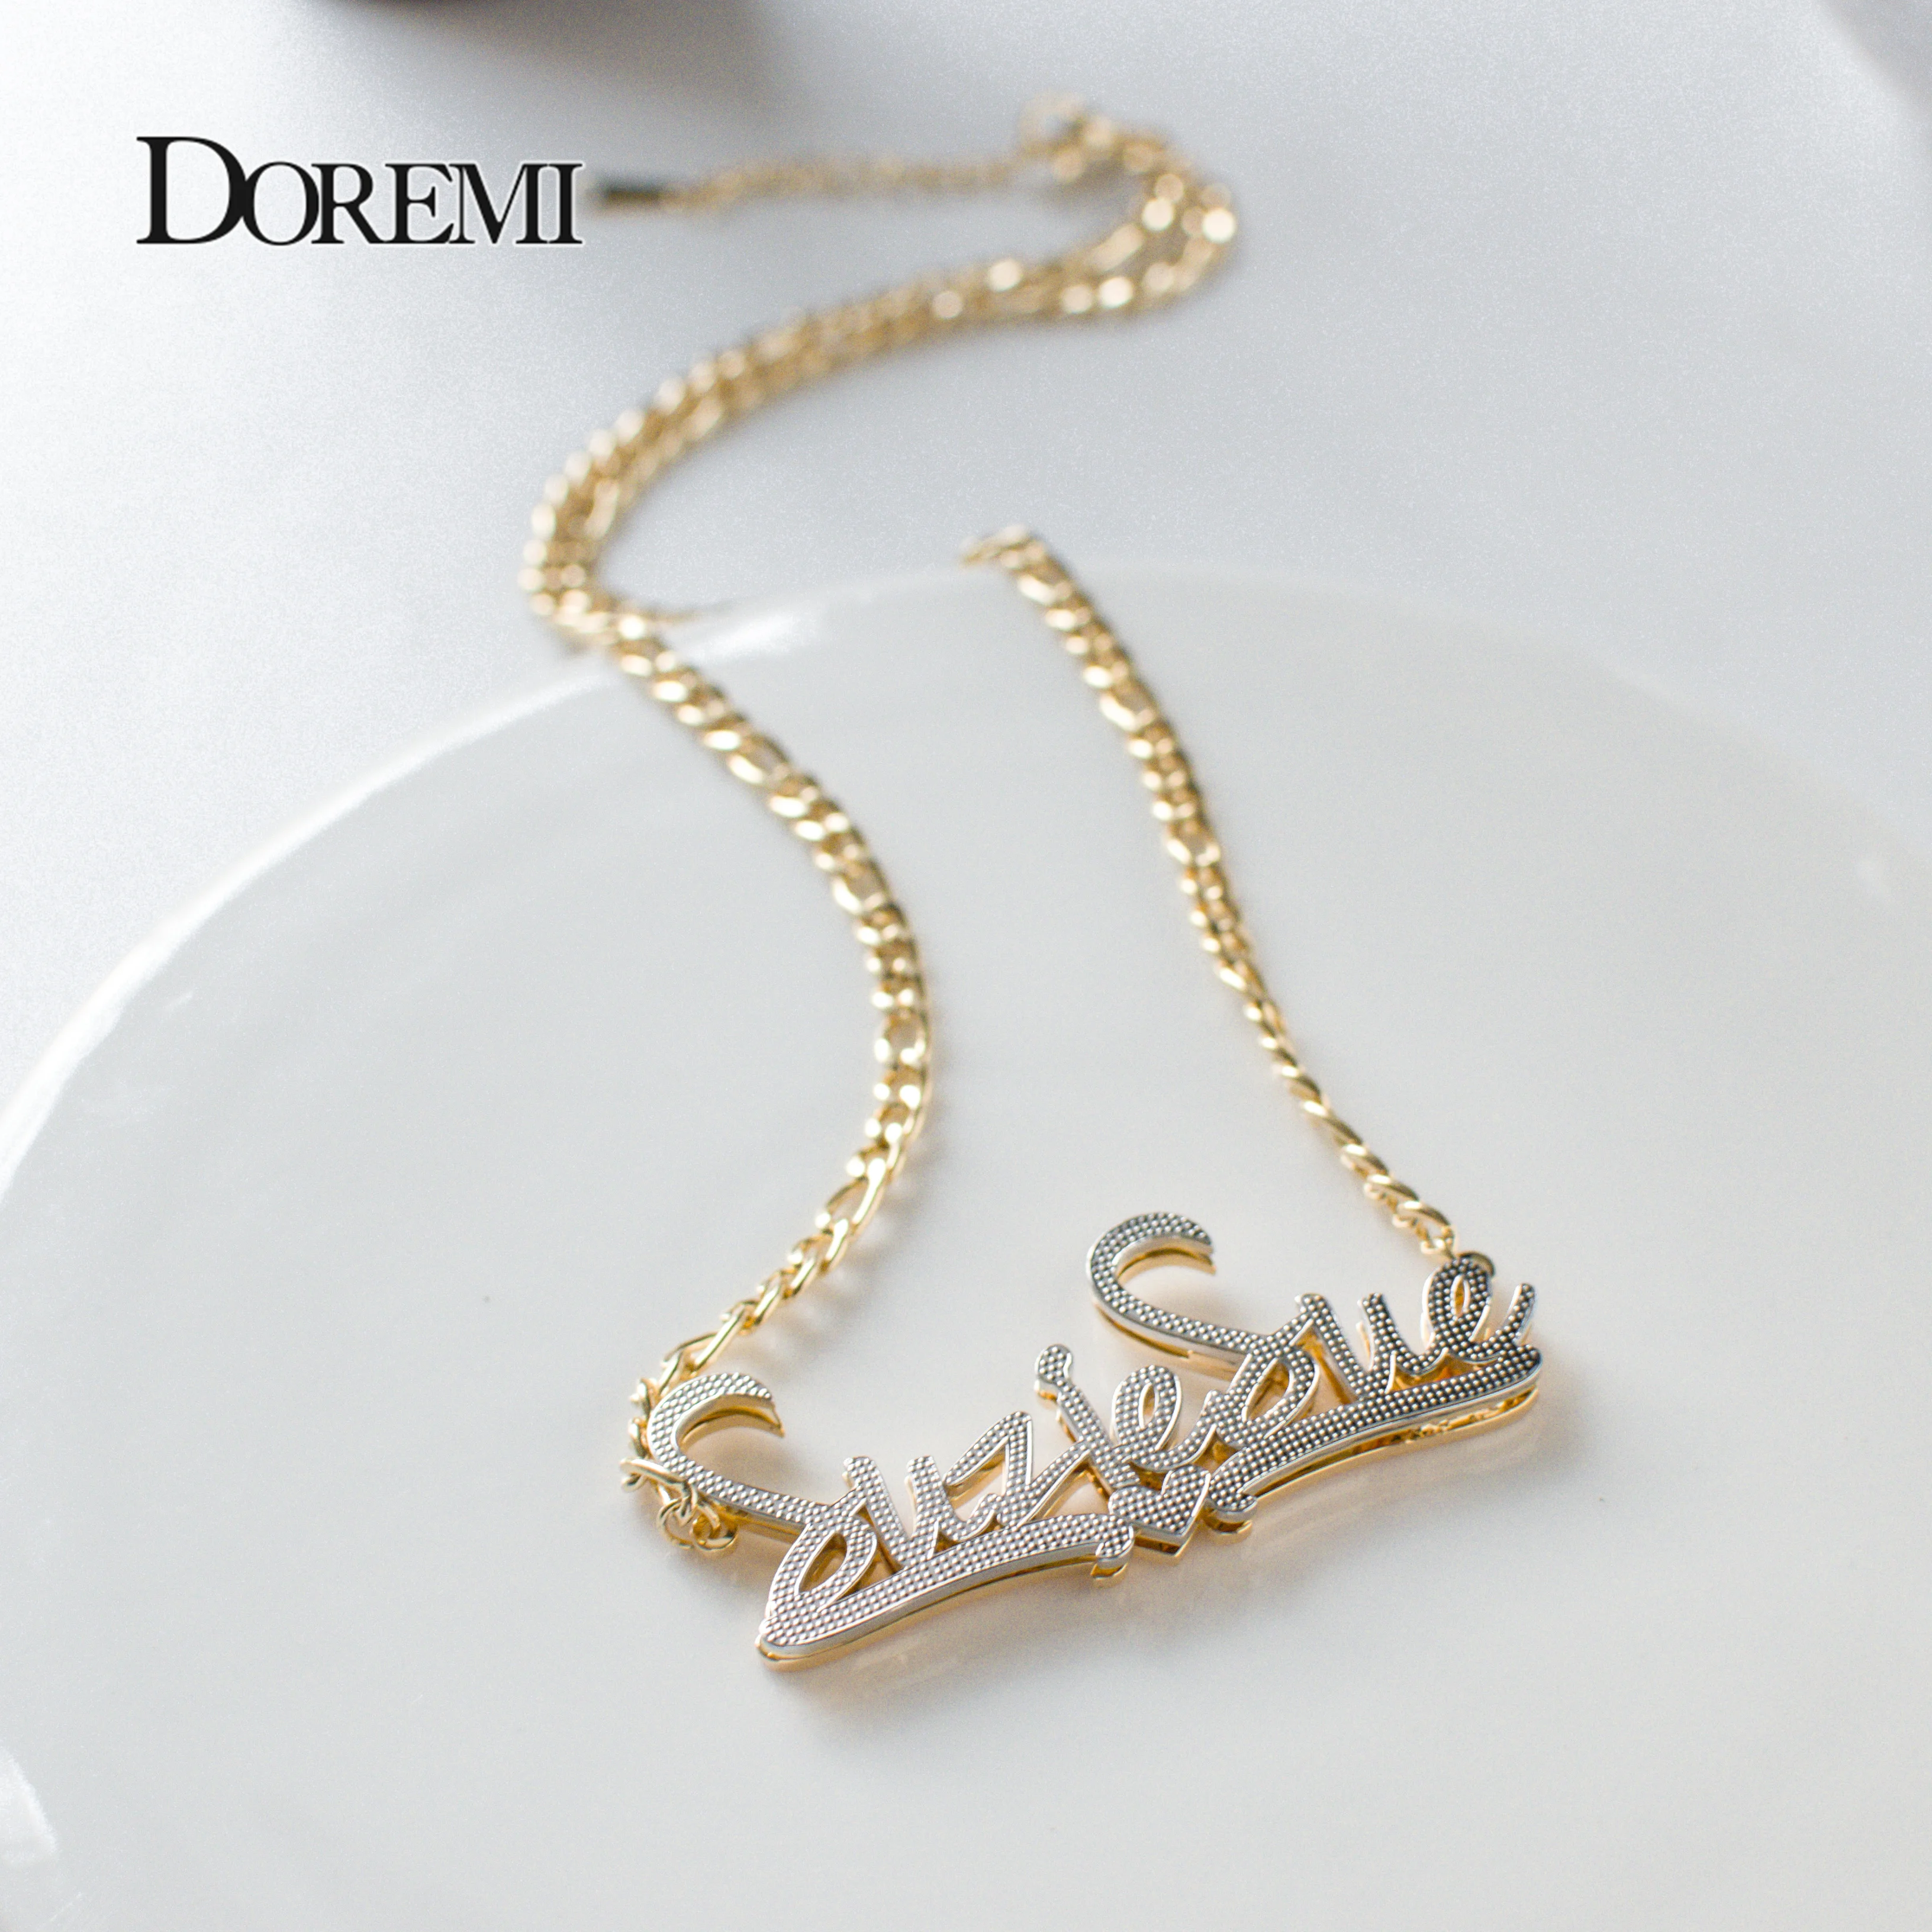 DOREMI 2 Toned 304 Stainless Name Necklace Heart Nameplate Personalized Pendant Double Layer Custom Jewelry Valentine's Day Gift 50pcs 25pcs heart earrings cards necklace display card cardboard for jewelry packing retail price tags valentine s day gifts